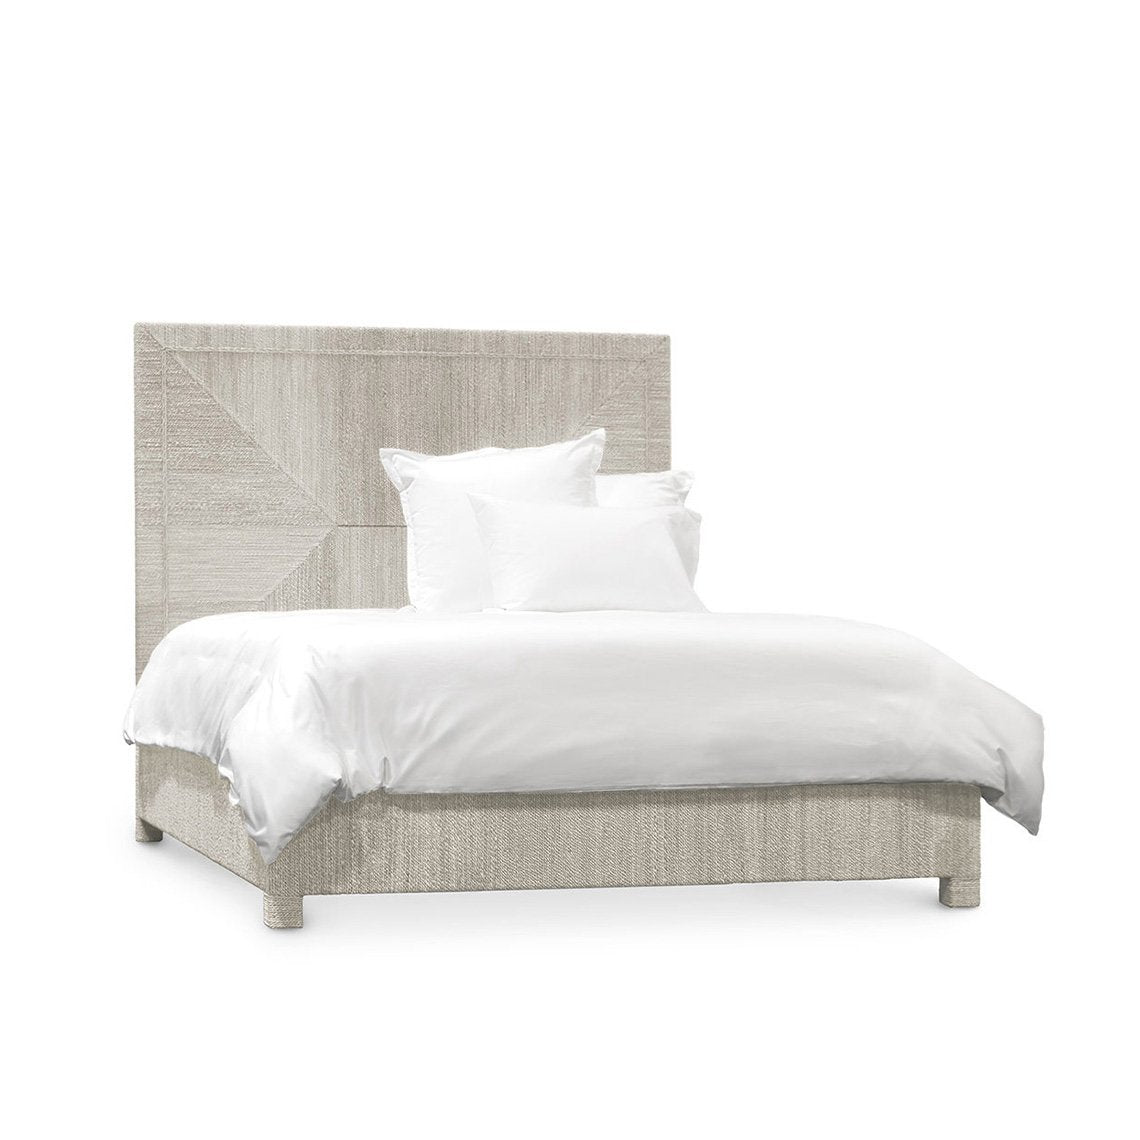 Woodside Bed, Queen, White Sand